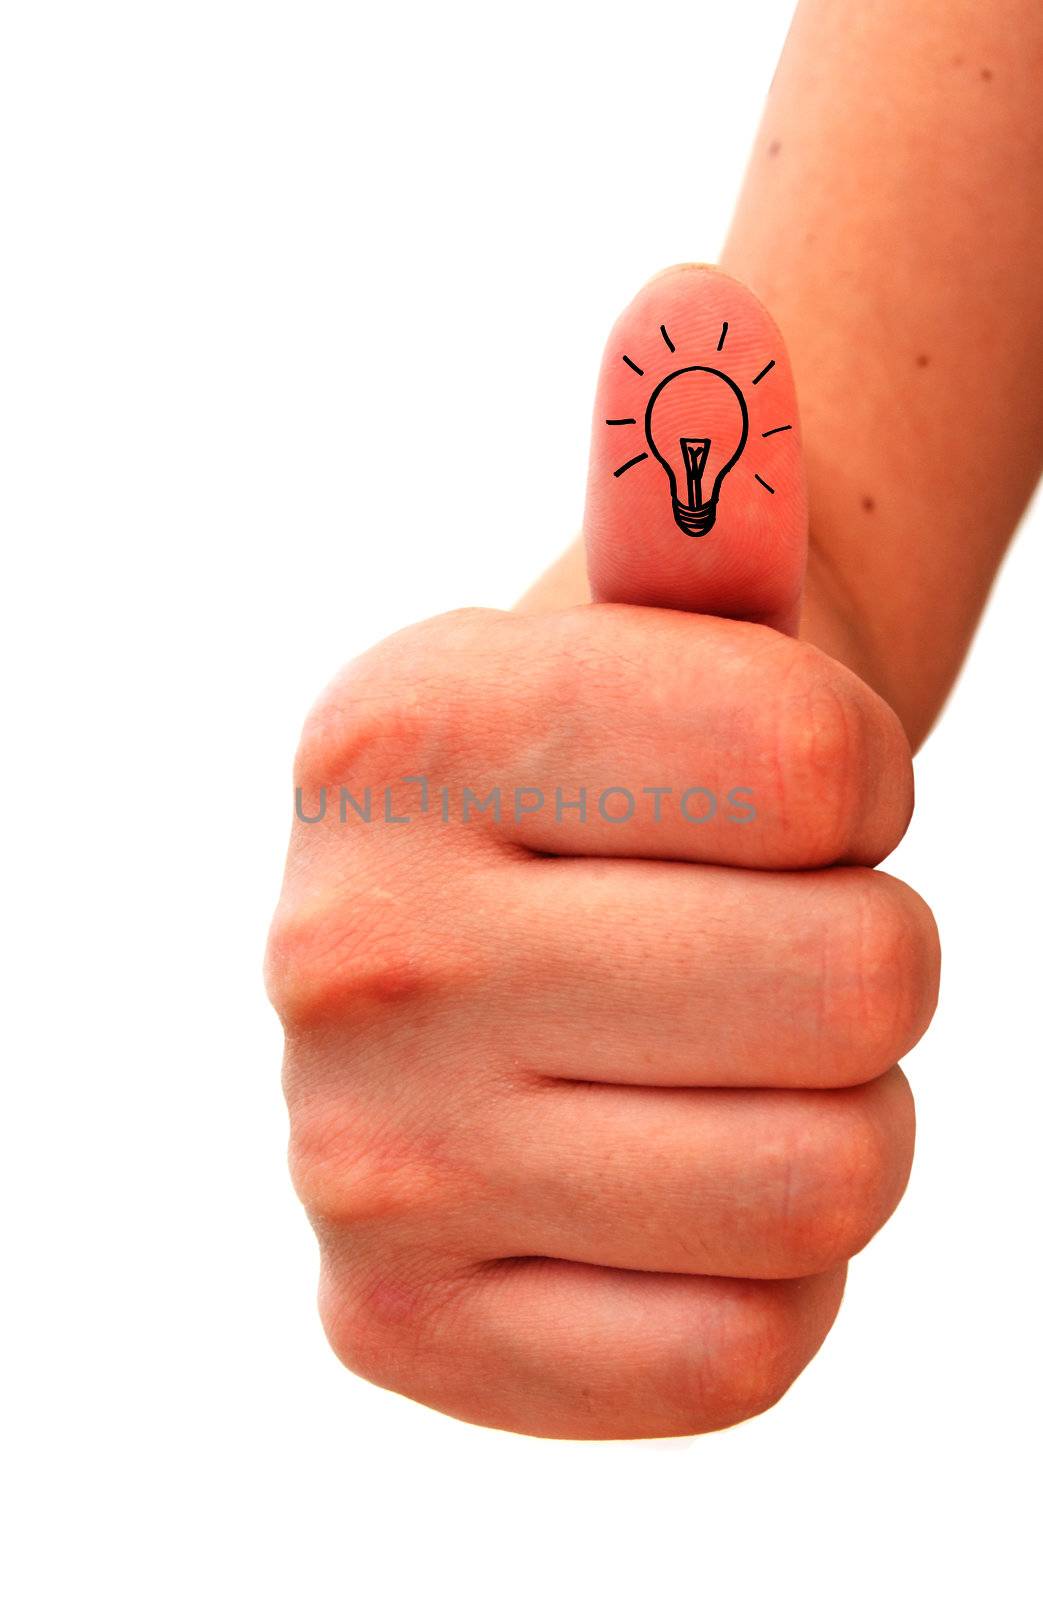 Light bulb printed on hand signaling thumbs up 